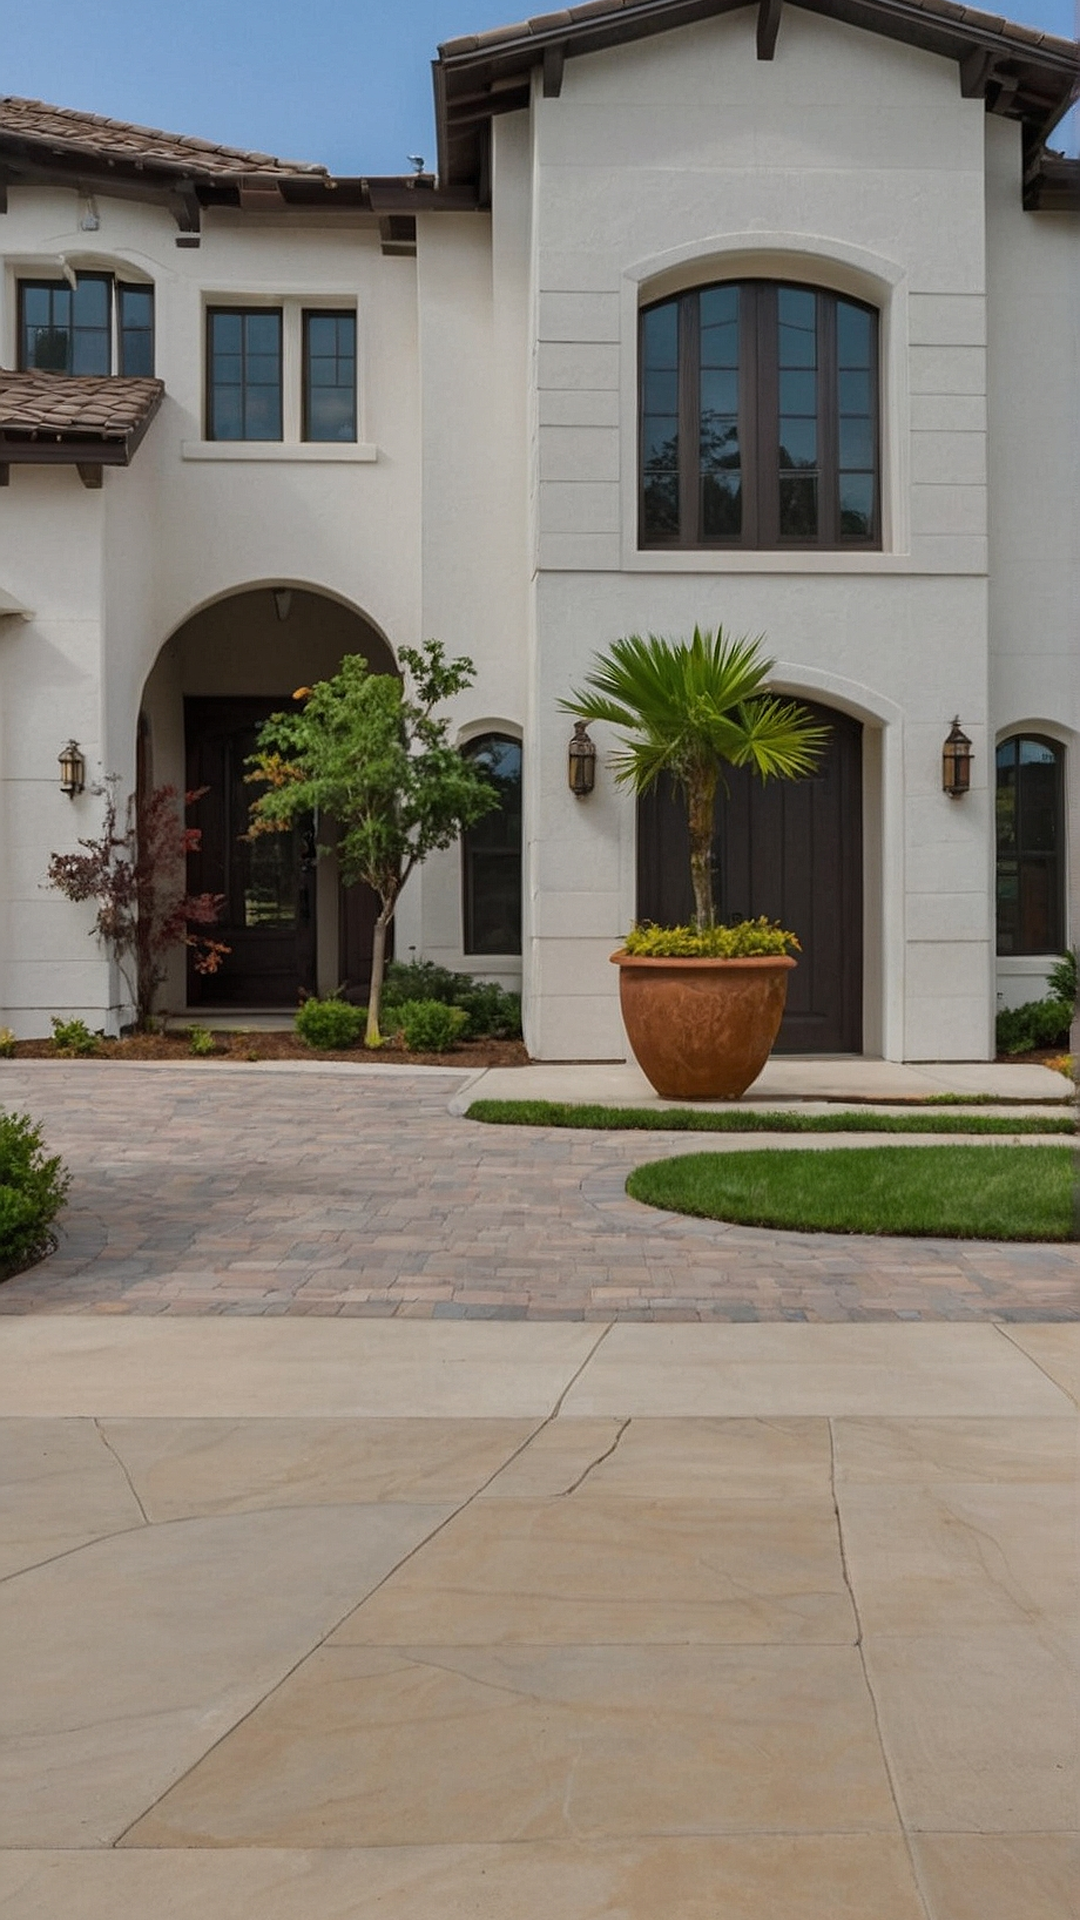 Harmony of Hardscape and Softscape in Driveway Entry